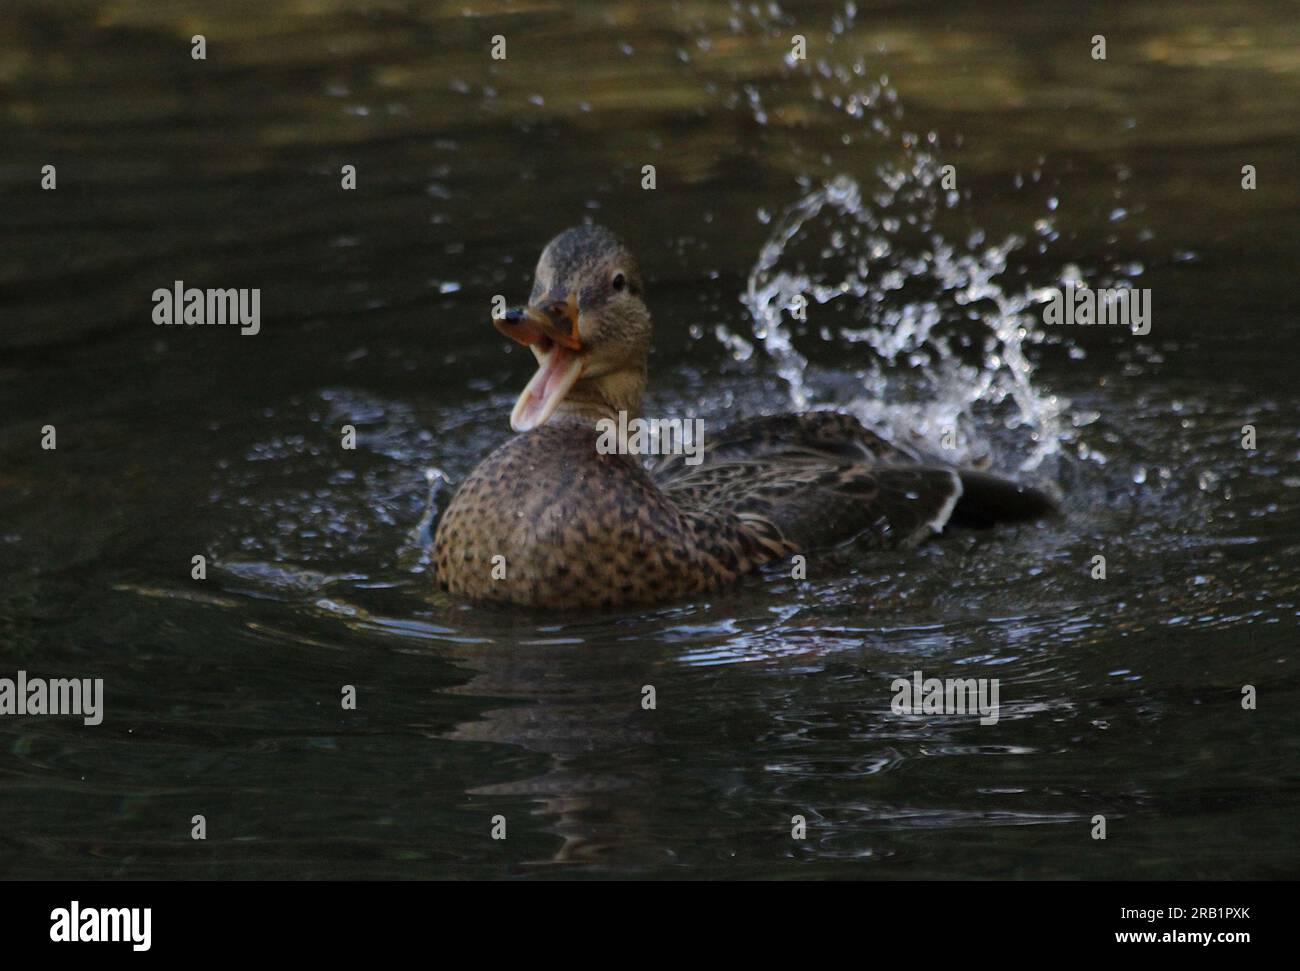 A duck splashes in the water and has its beak open. Stock Photo